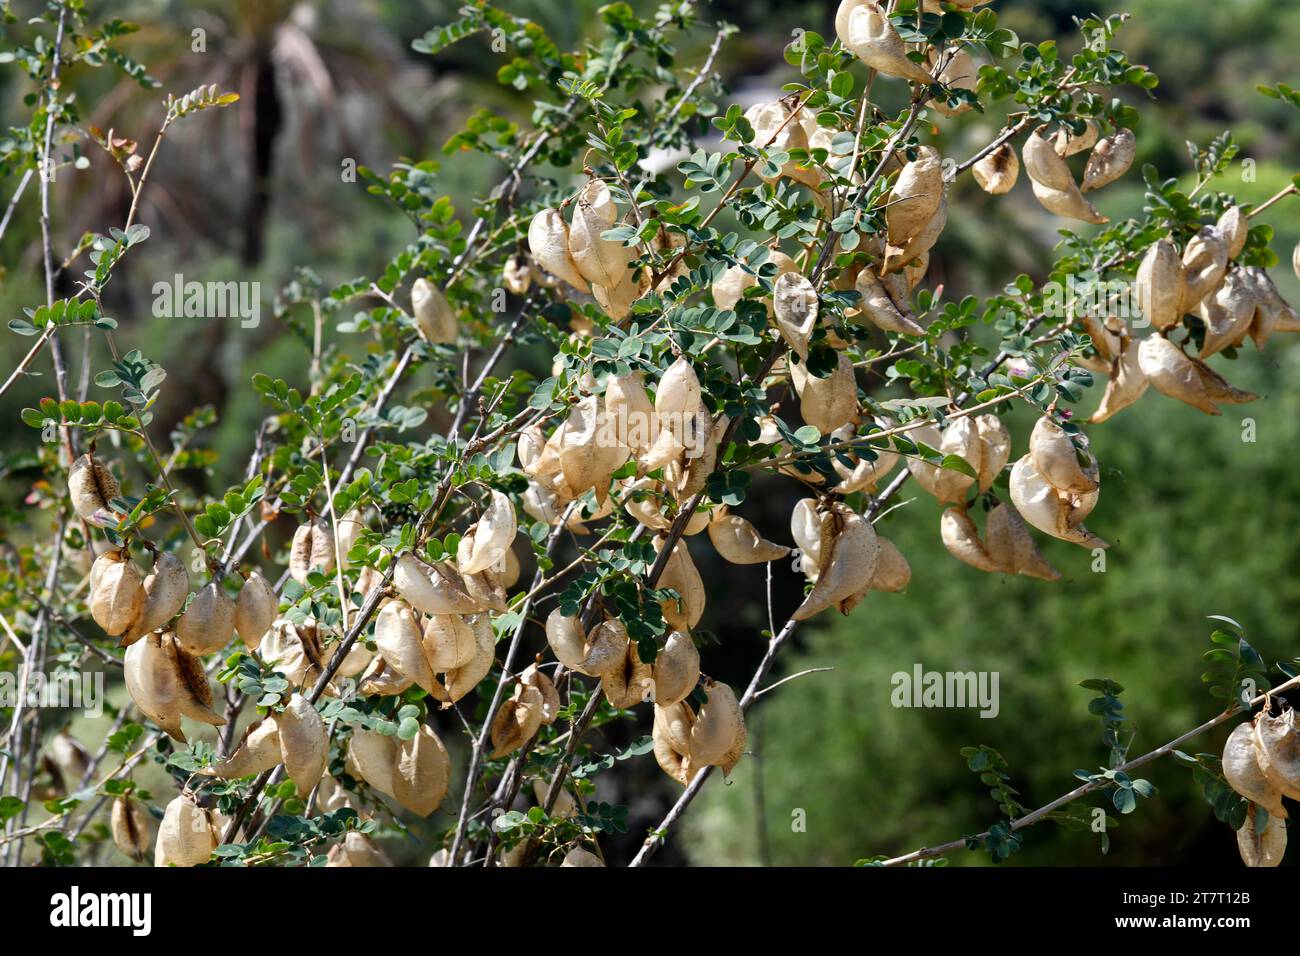 Bladder-senna (Colutea arborescens atlantica) is a deciduous shrub native to part of Europe and northwestern Africa. Fruits (legumes) detail. Stock Photo